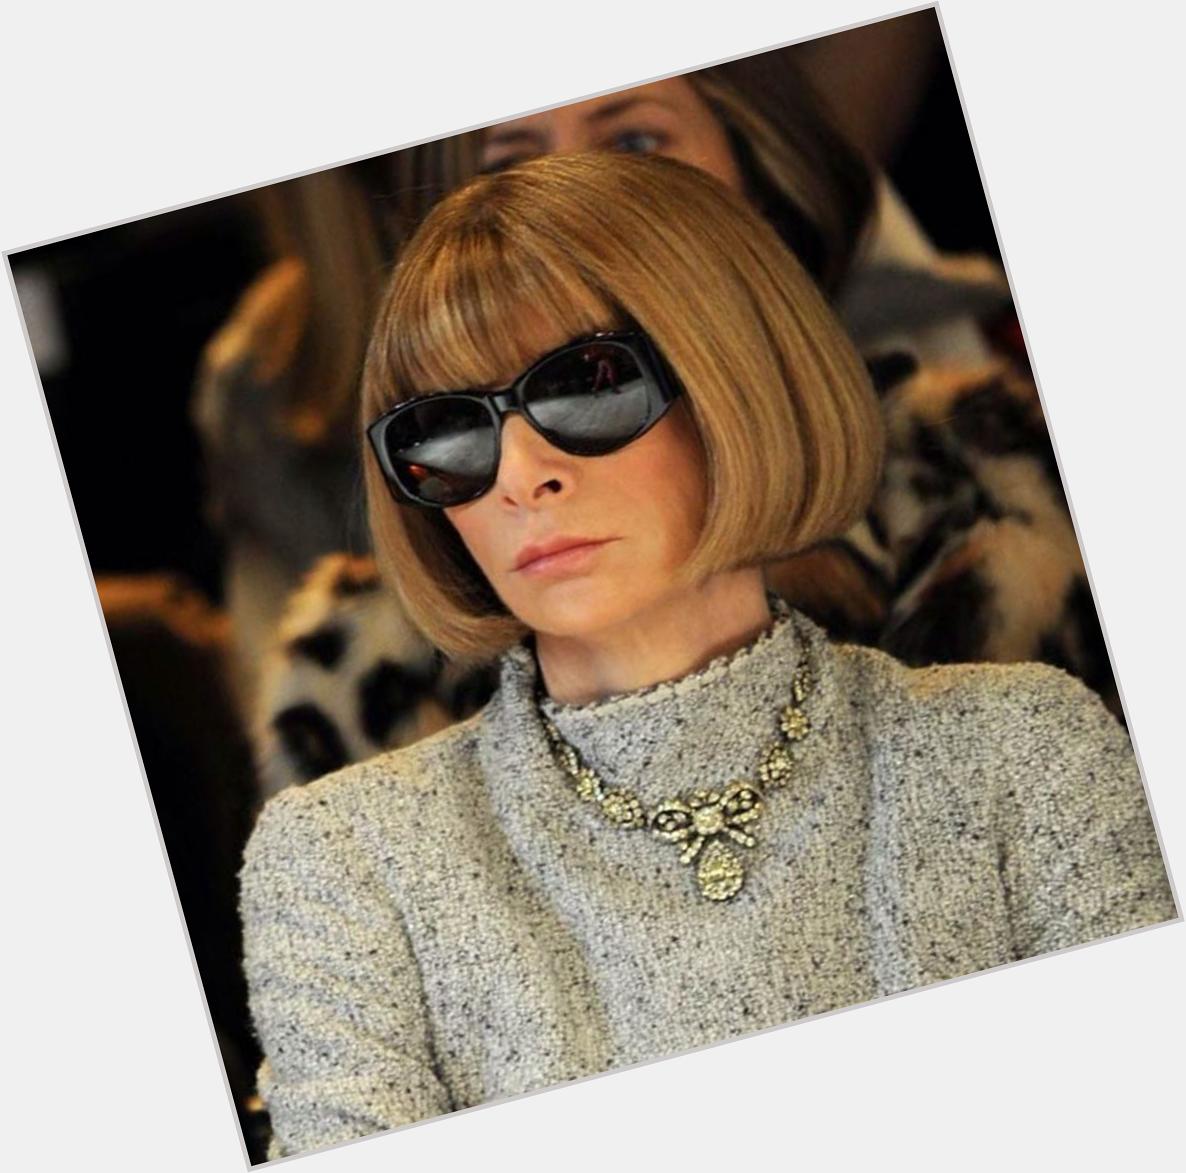 HAPPY BIRTHDAY ANNA WINTOUR! SHE WILL READ YOU TO FILTH 